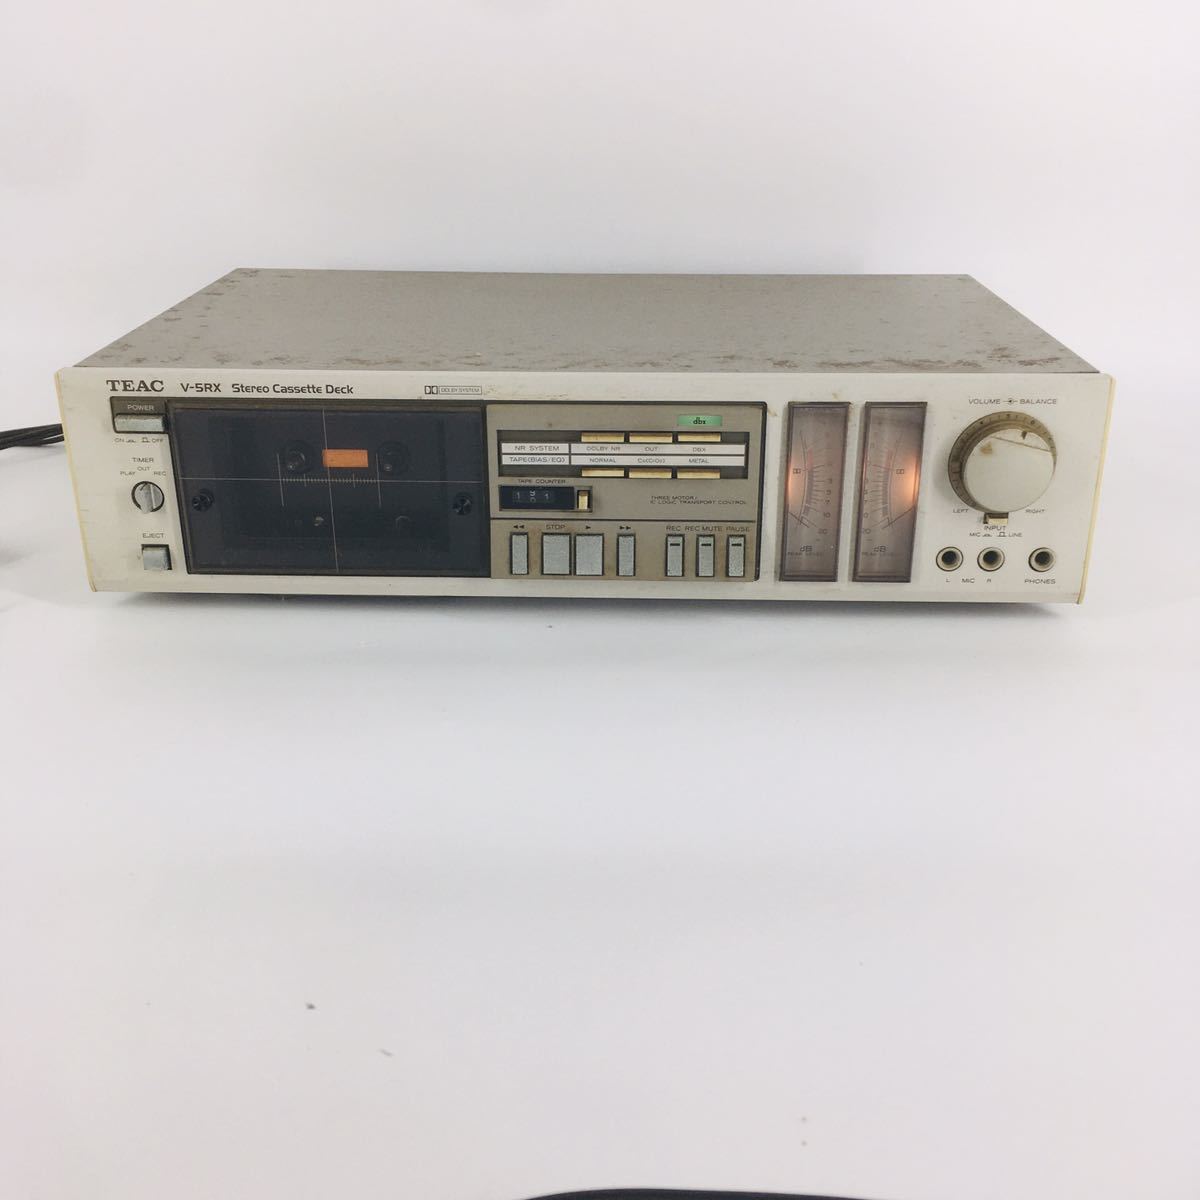 TEAC ティアック V-5RX カセットデッキ Stereo Cassette Deck 中古品　通電確認済み_画像1